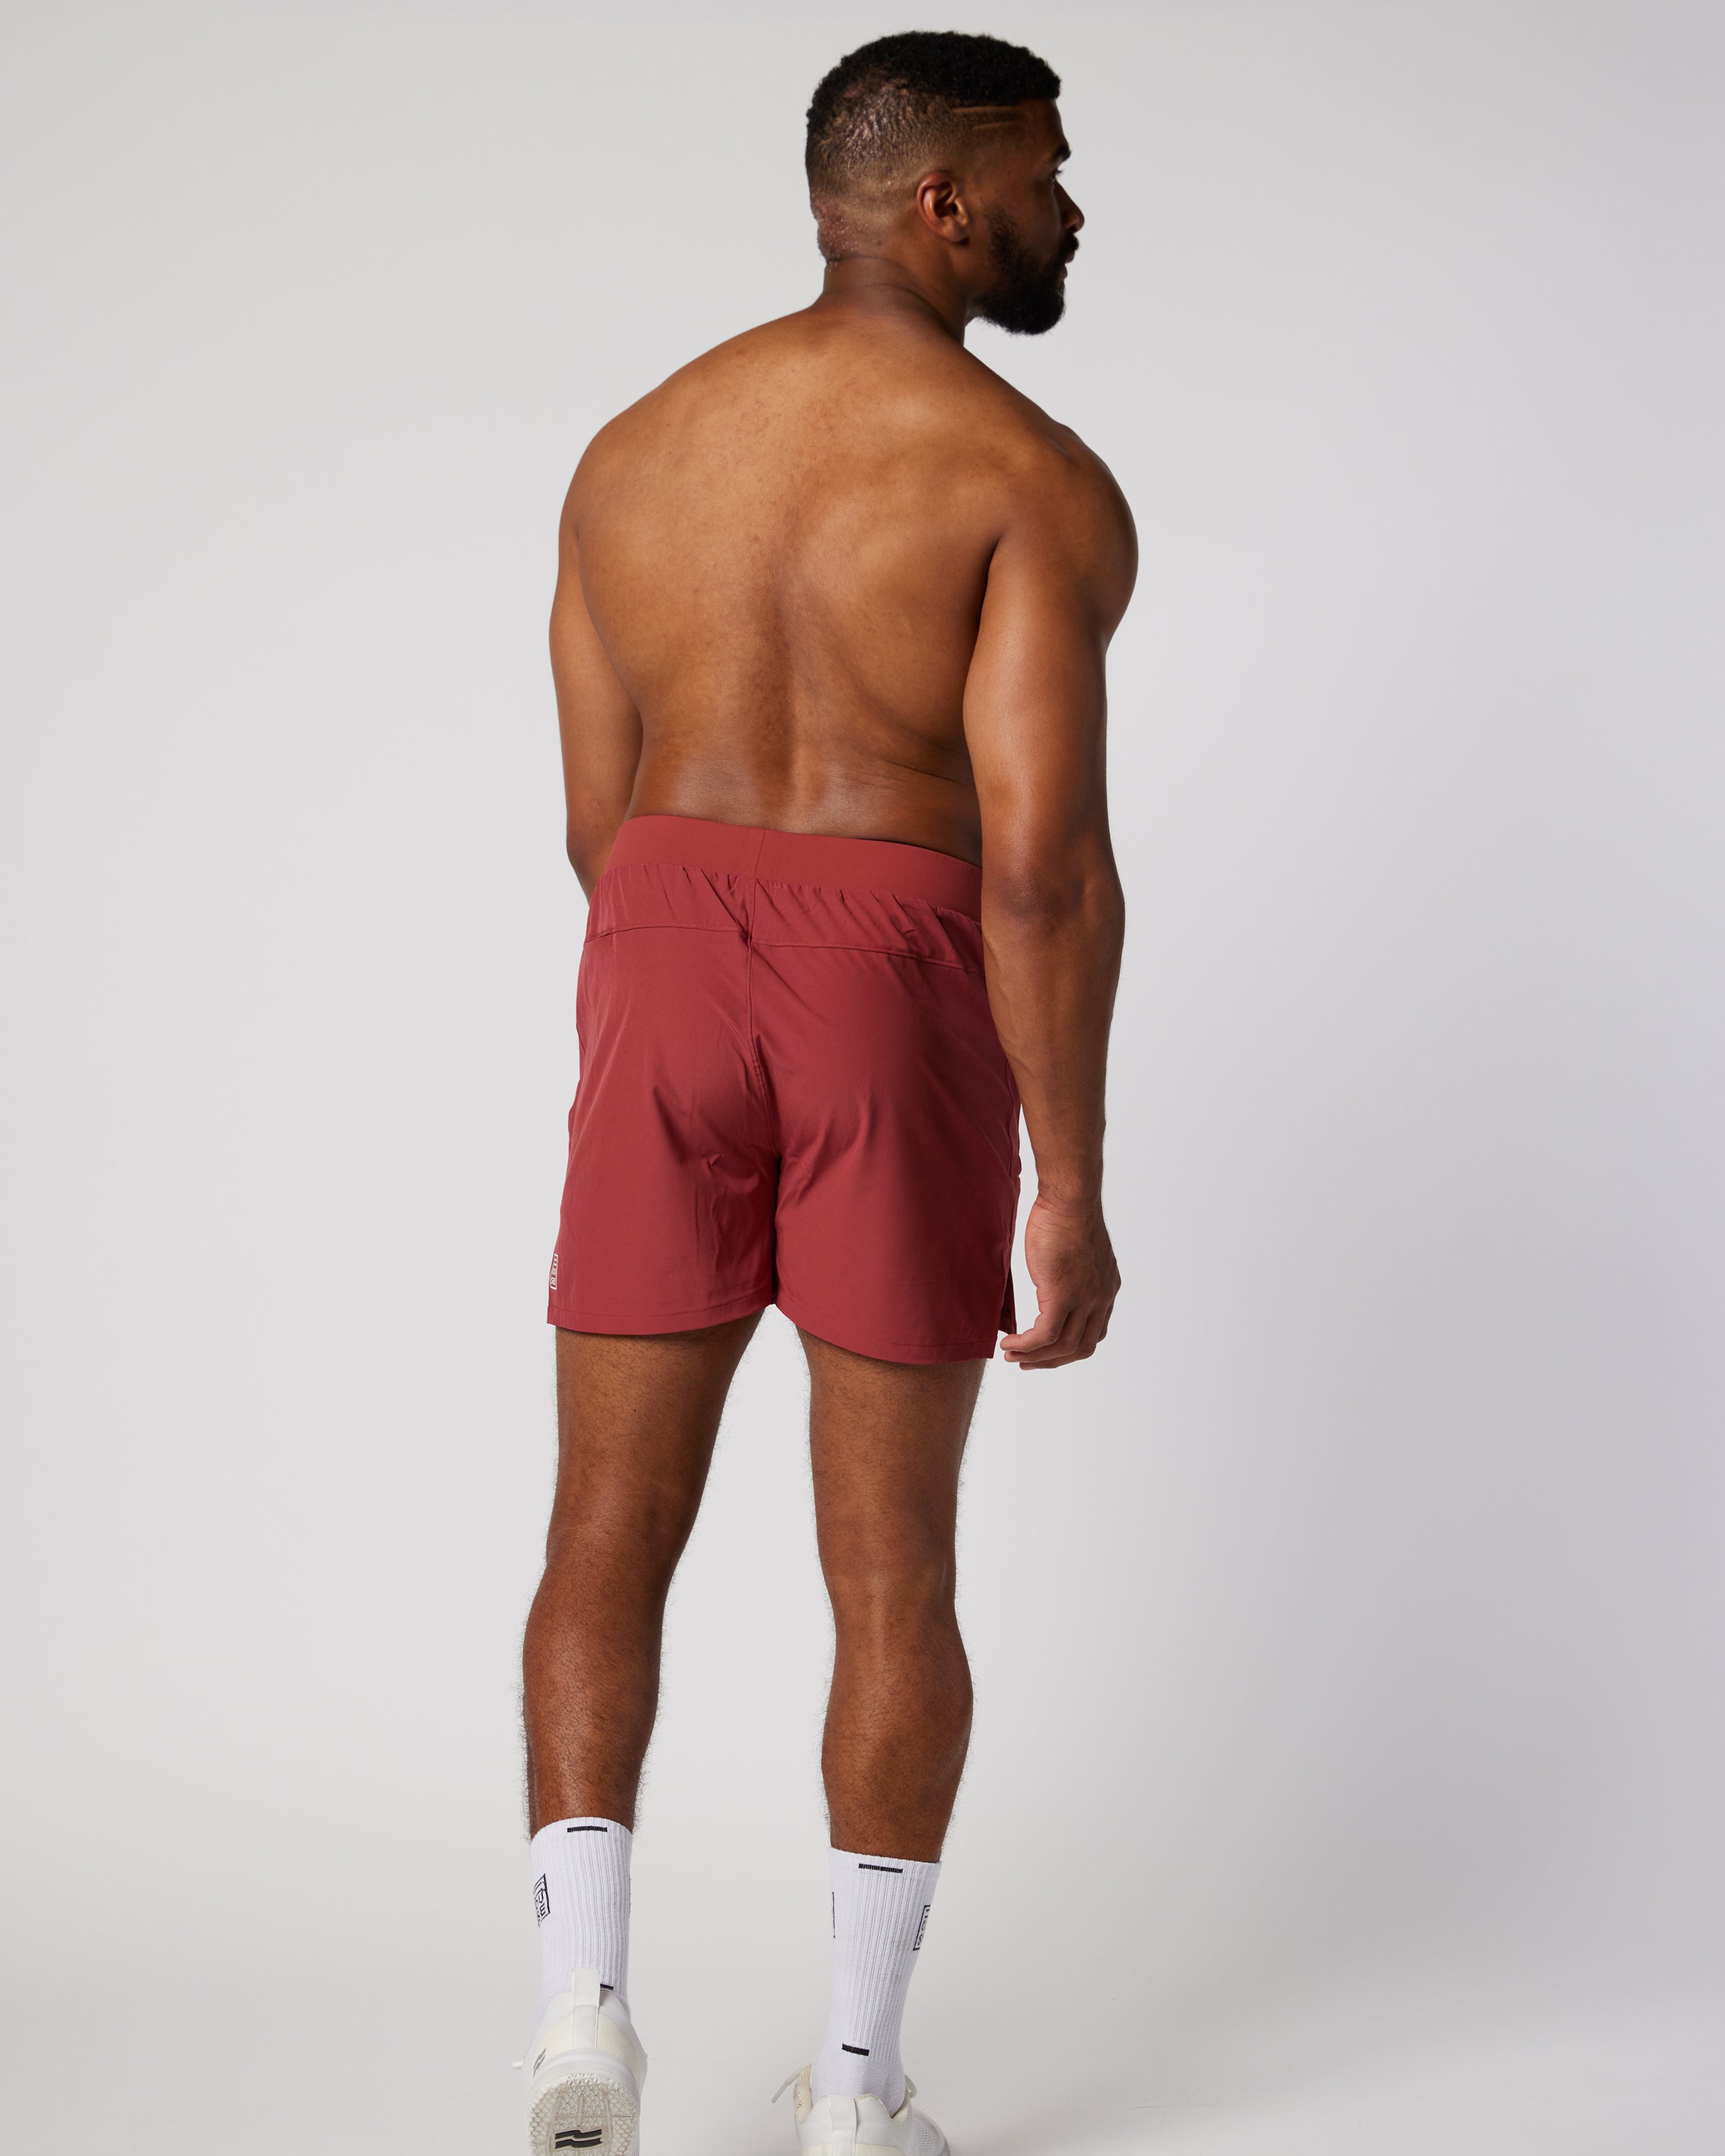 Mens unlined sports short in Mars Red